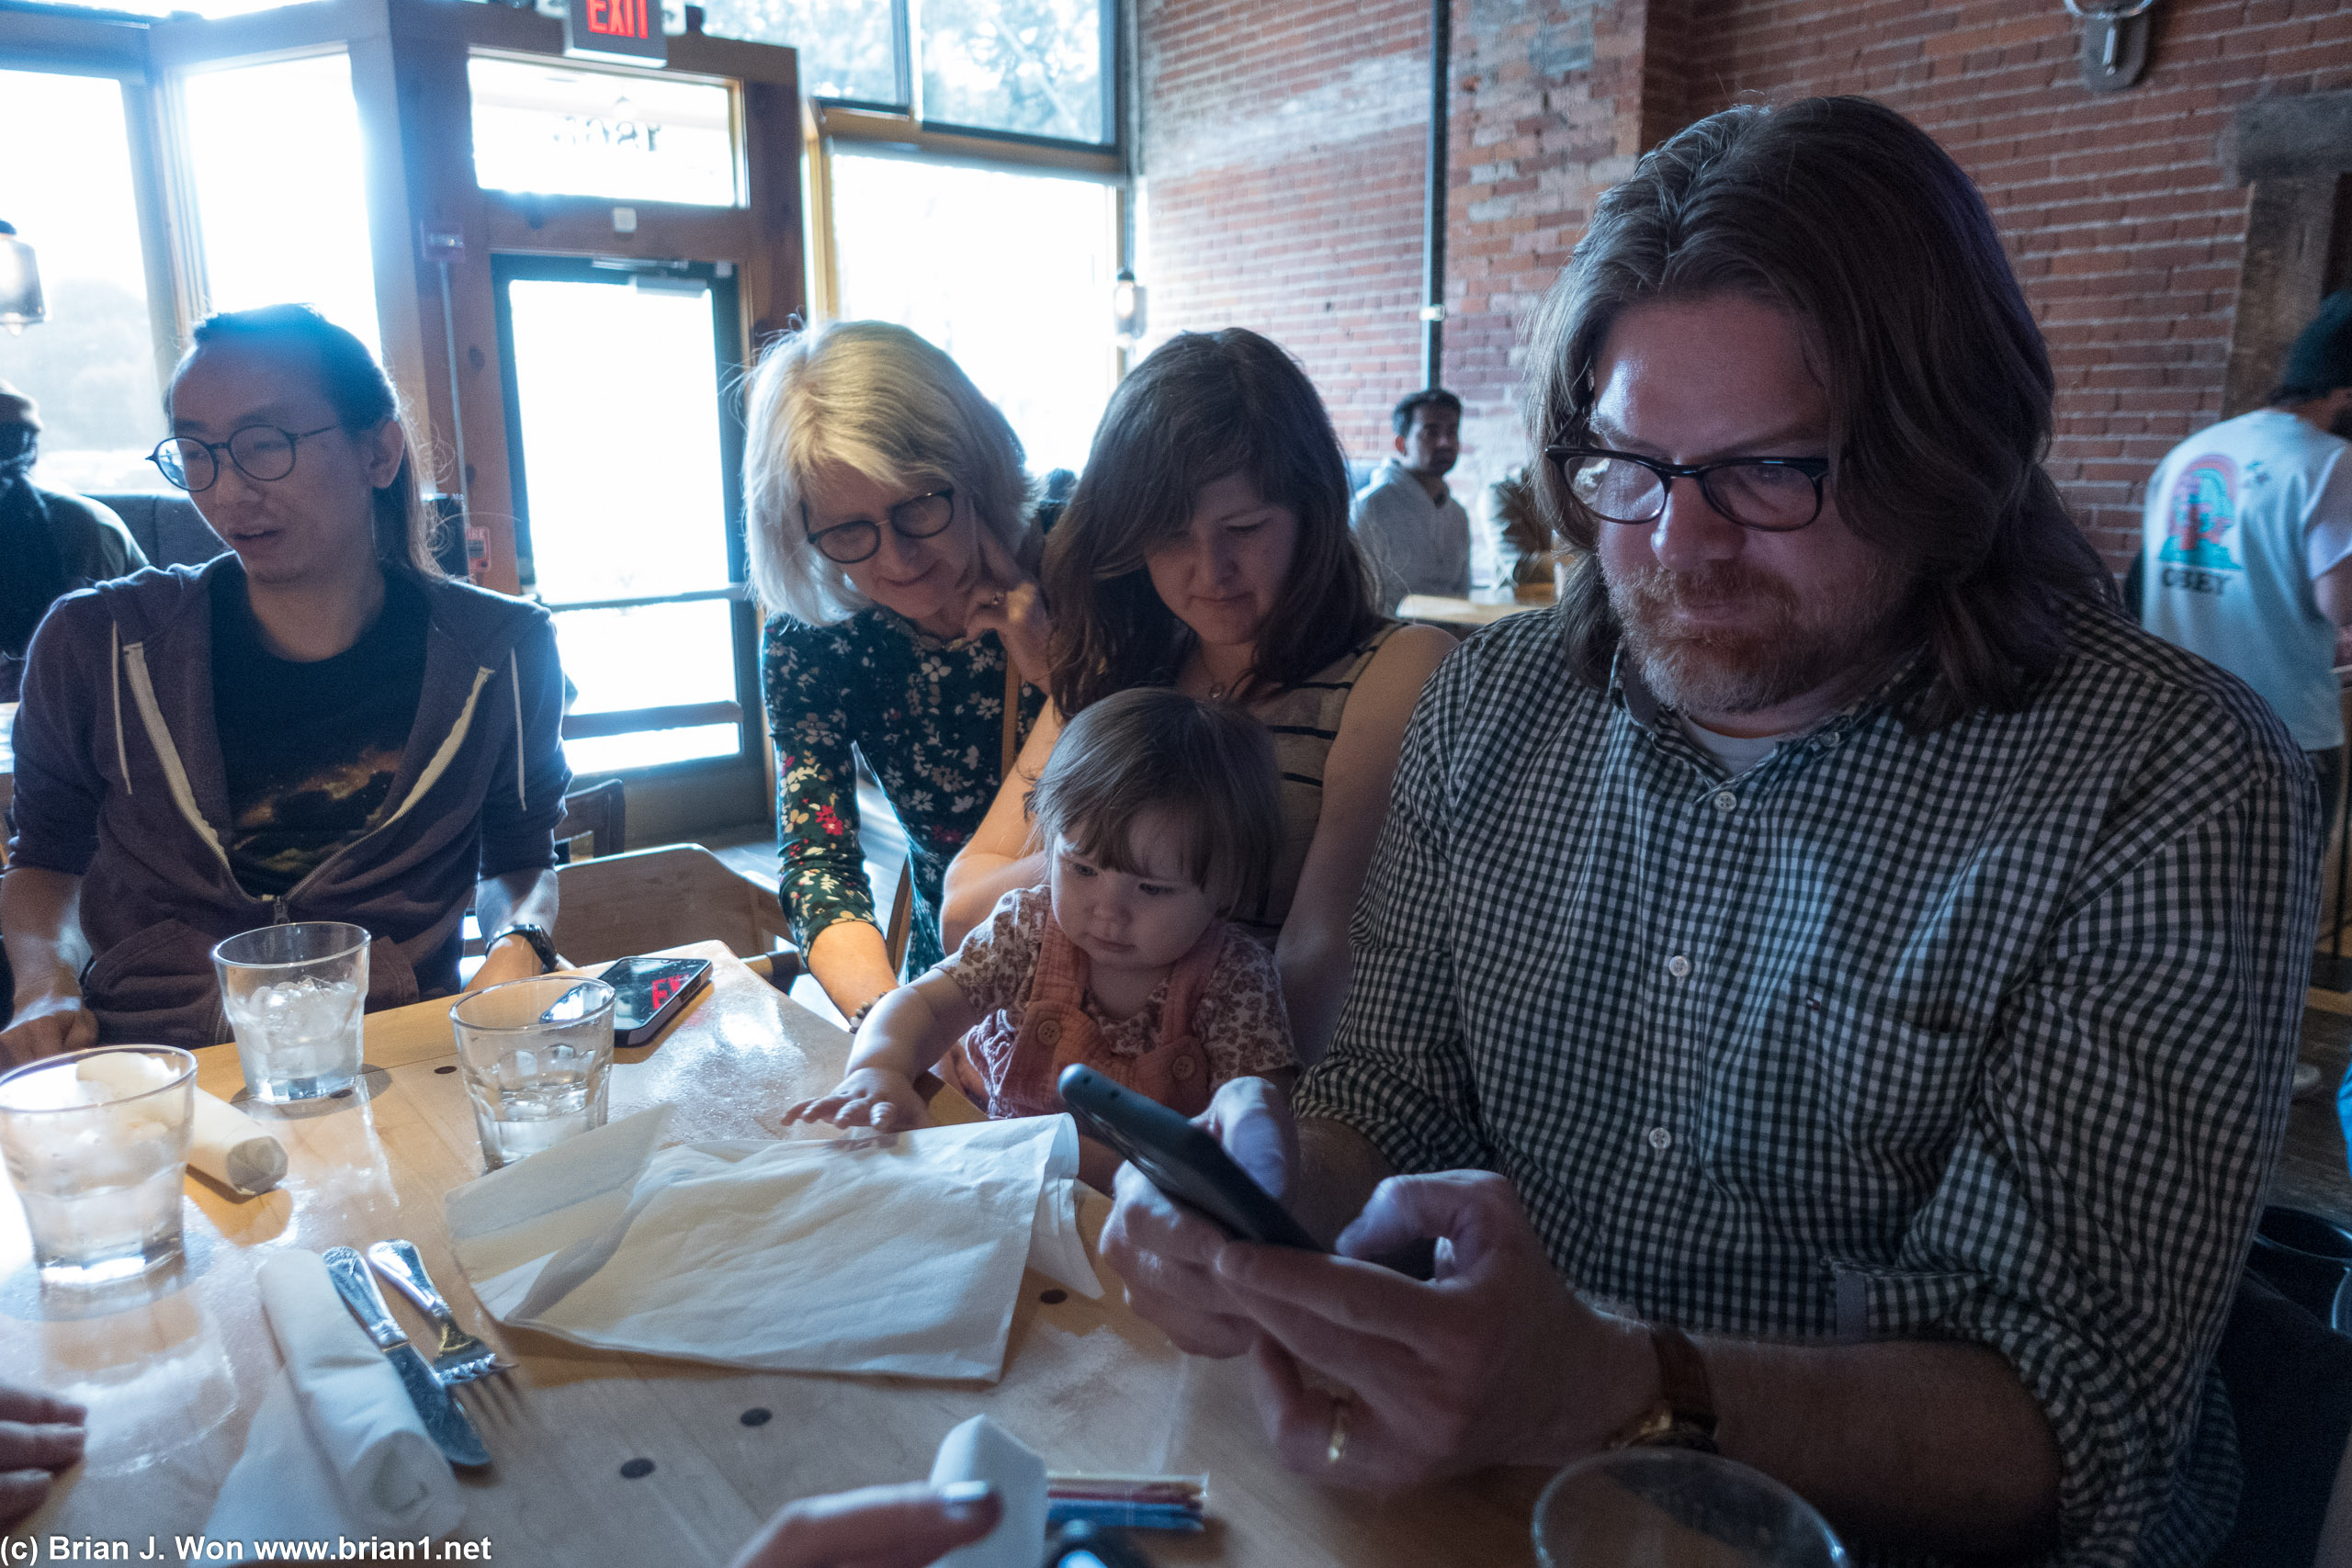 Adults reading menus, toddler playing with napkins.